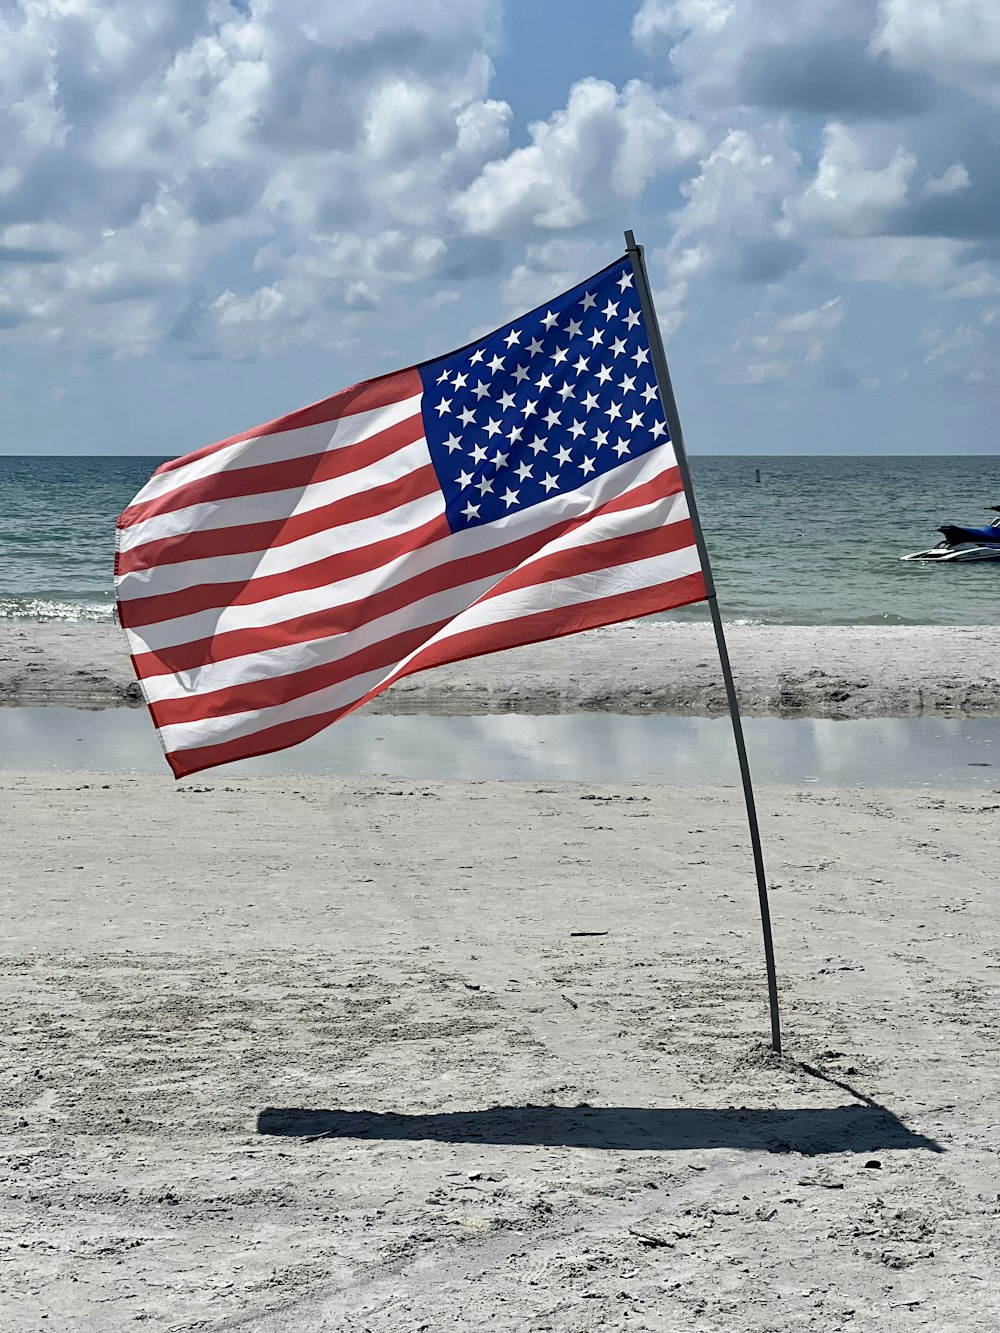 an american flag on a beach with a boat in the background